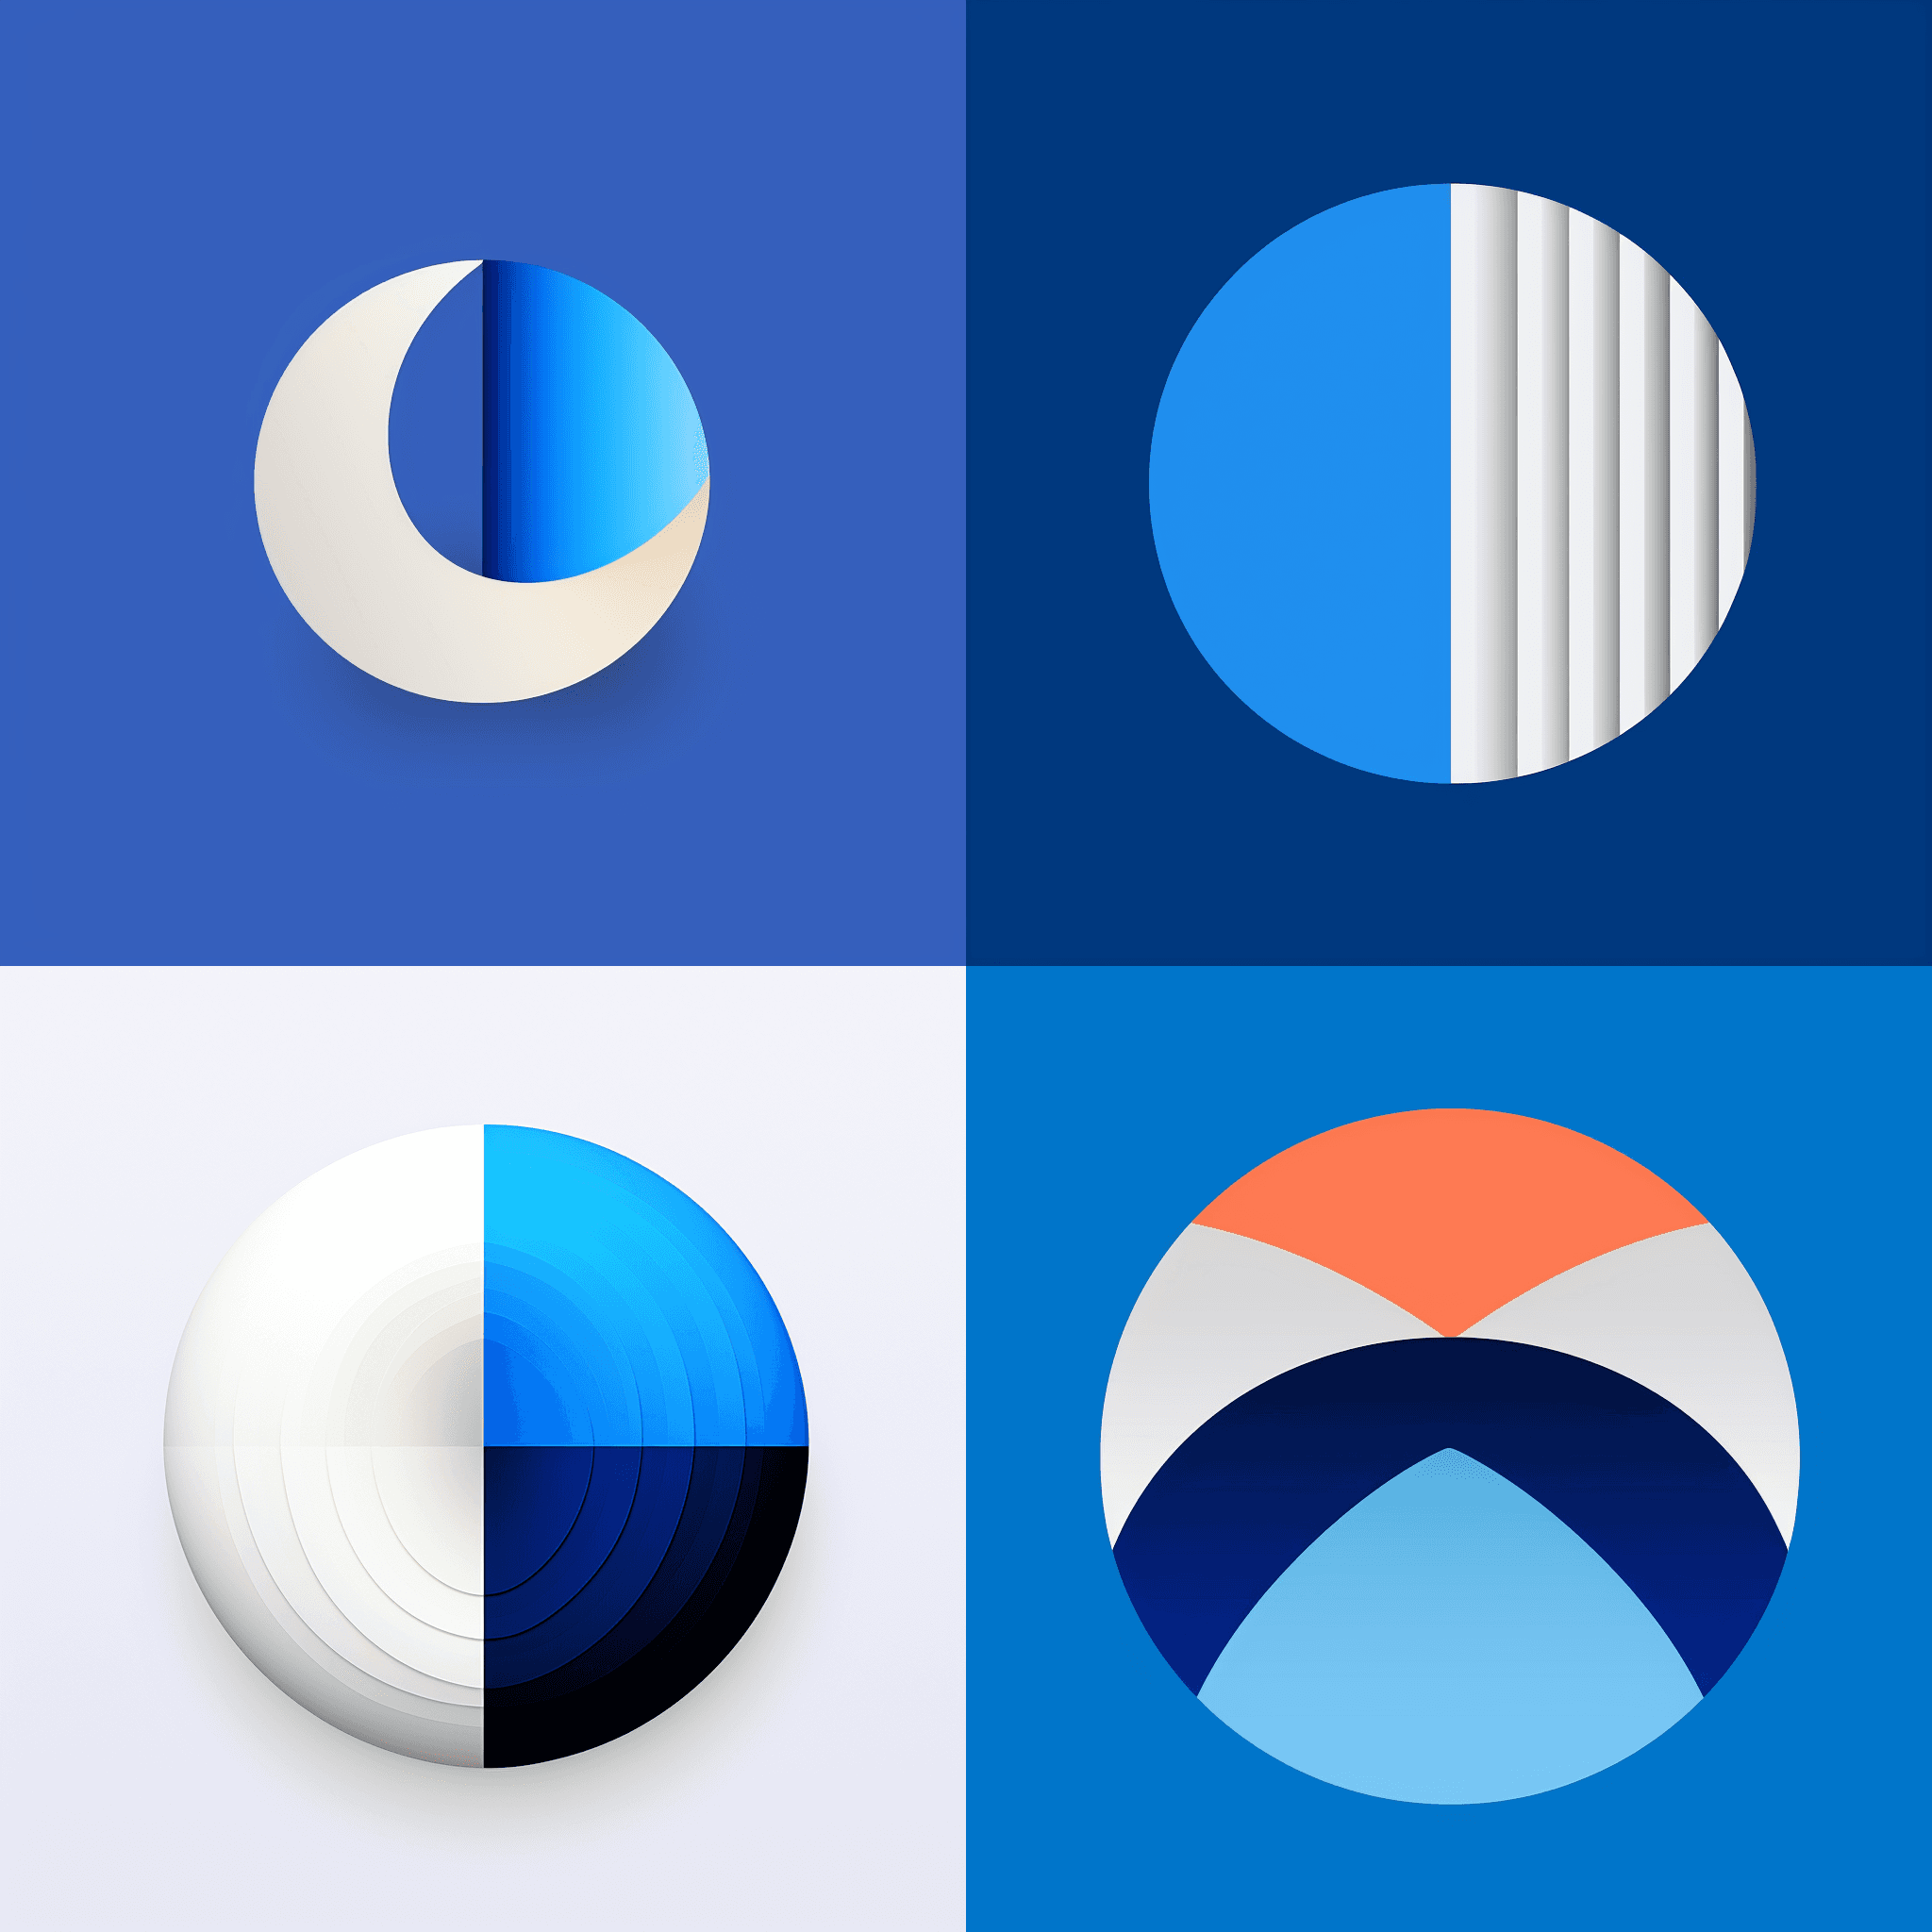 A graphic representation featuring two semicircles forming a shape with a parallel line in between. The line is colored in bright blue and white, while the text is presented in a minimalistic font, combining both bold and regular weights.